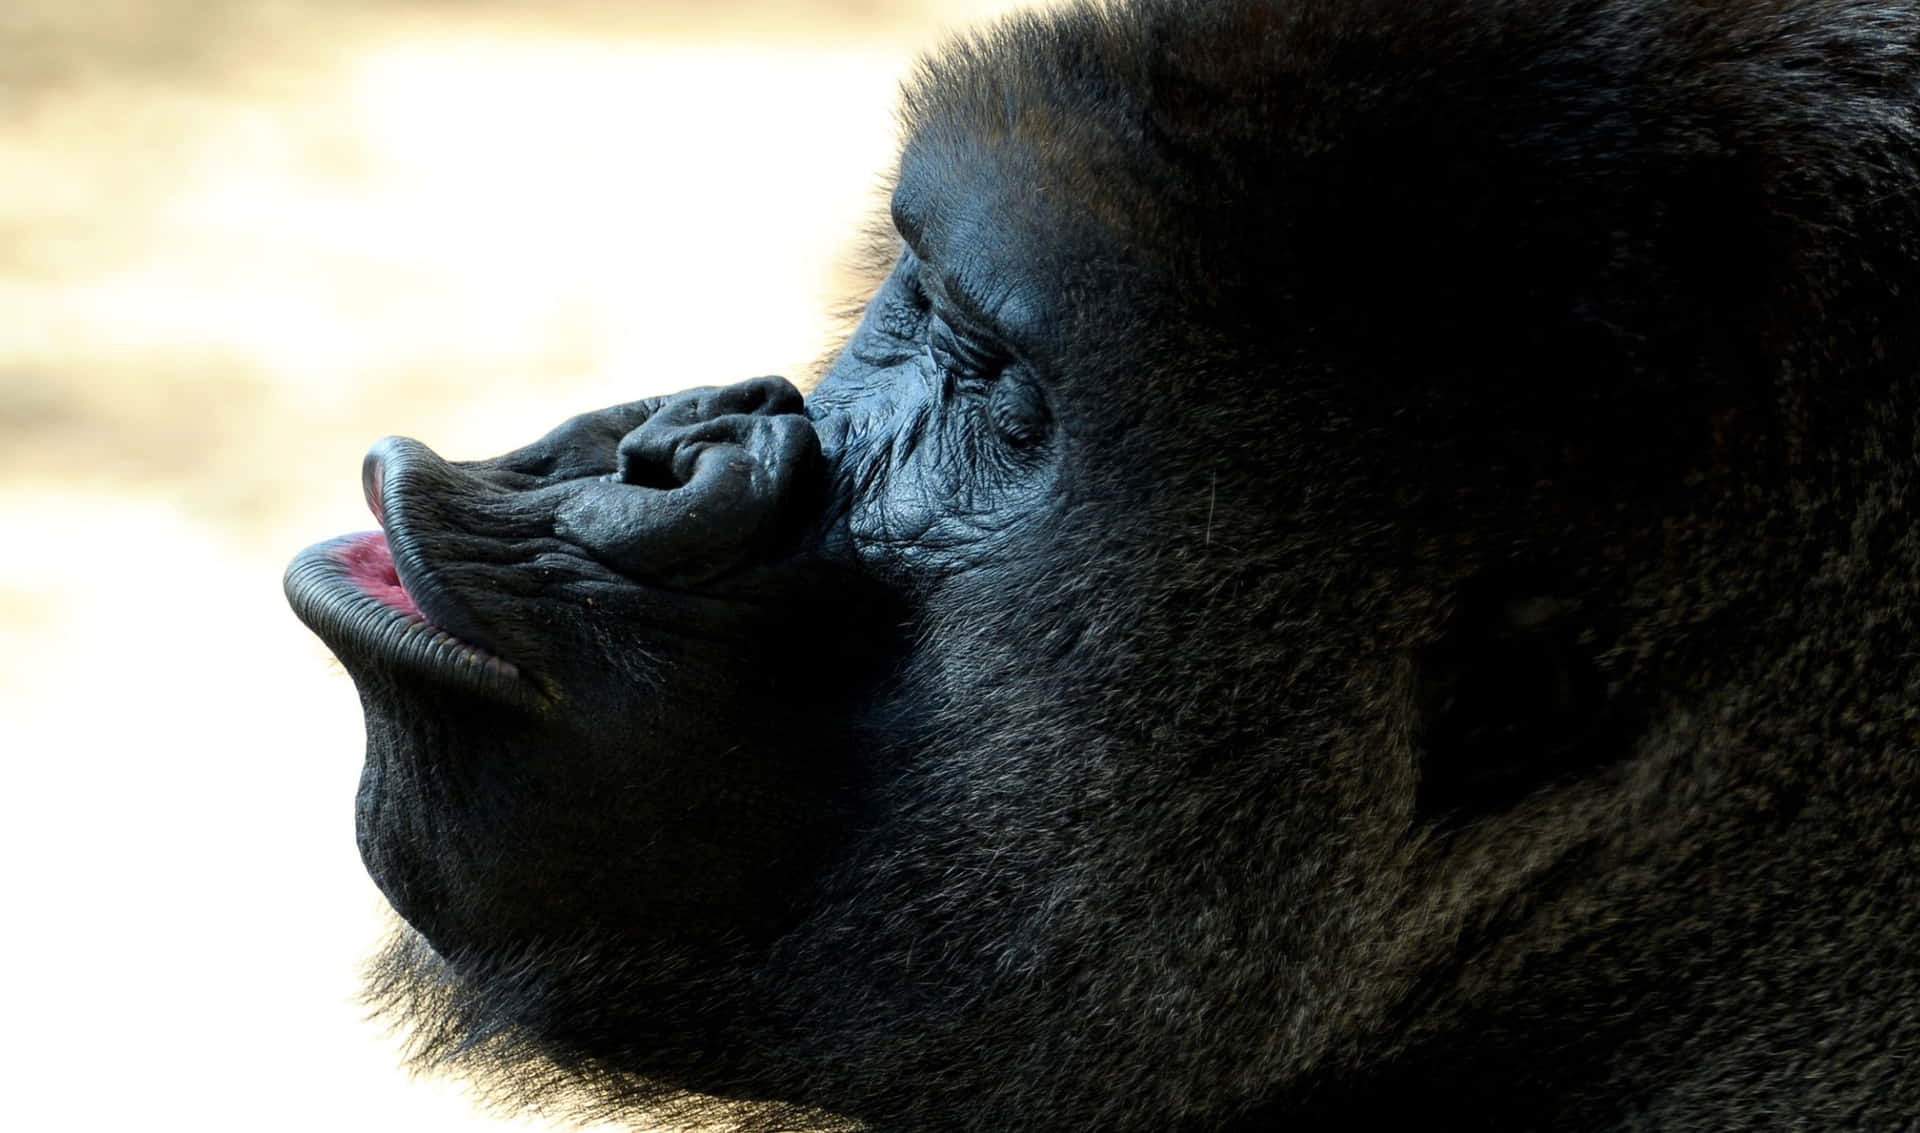 An adult Gorilla looks proudly into the distance.